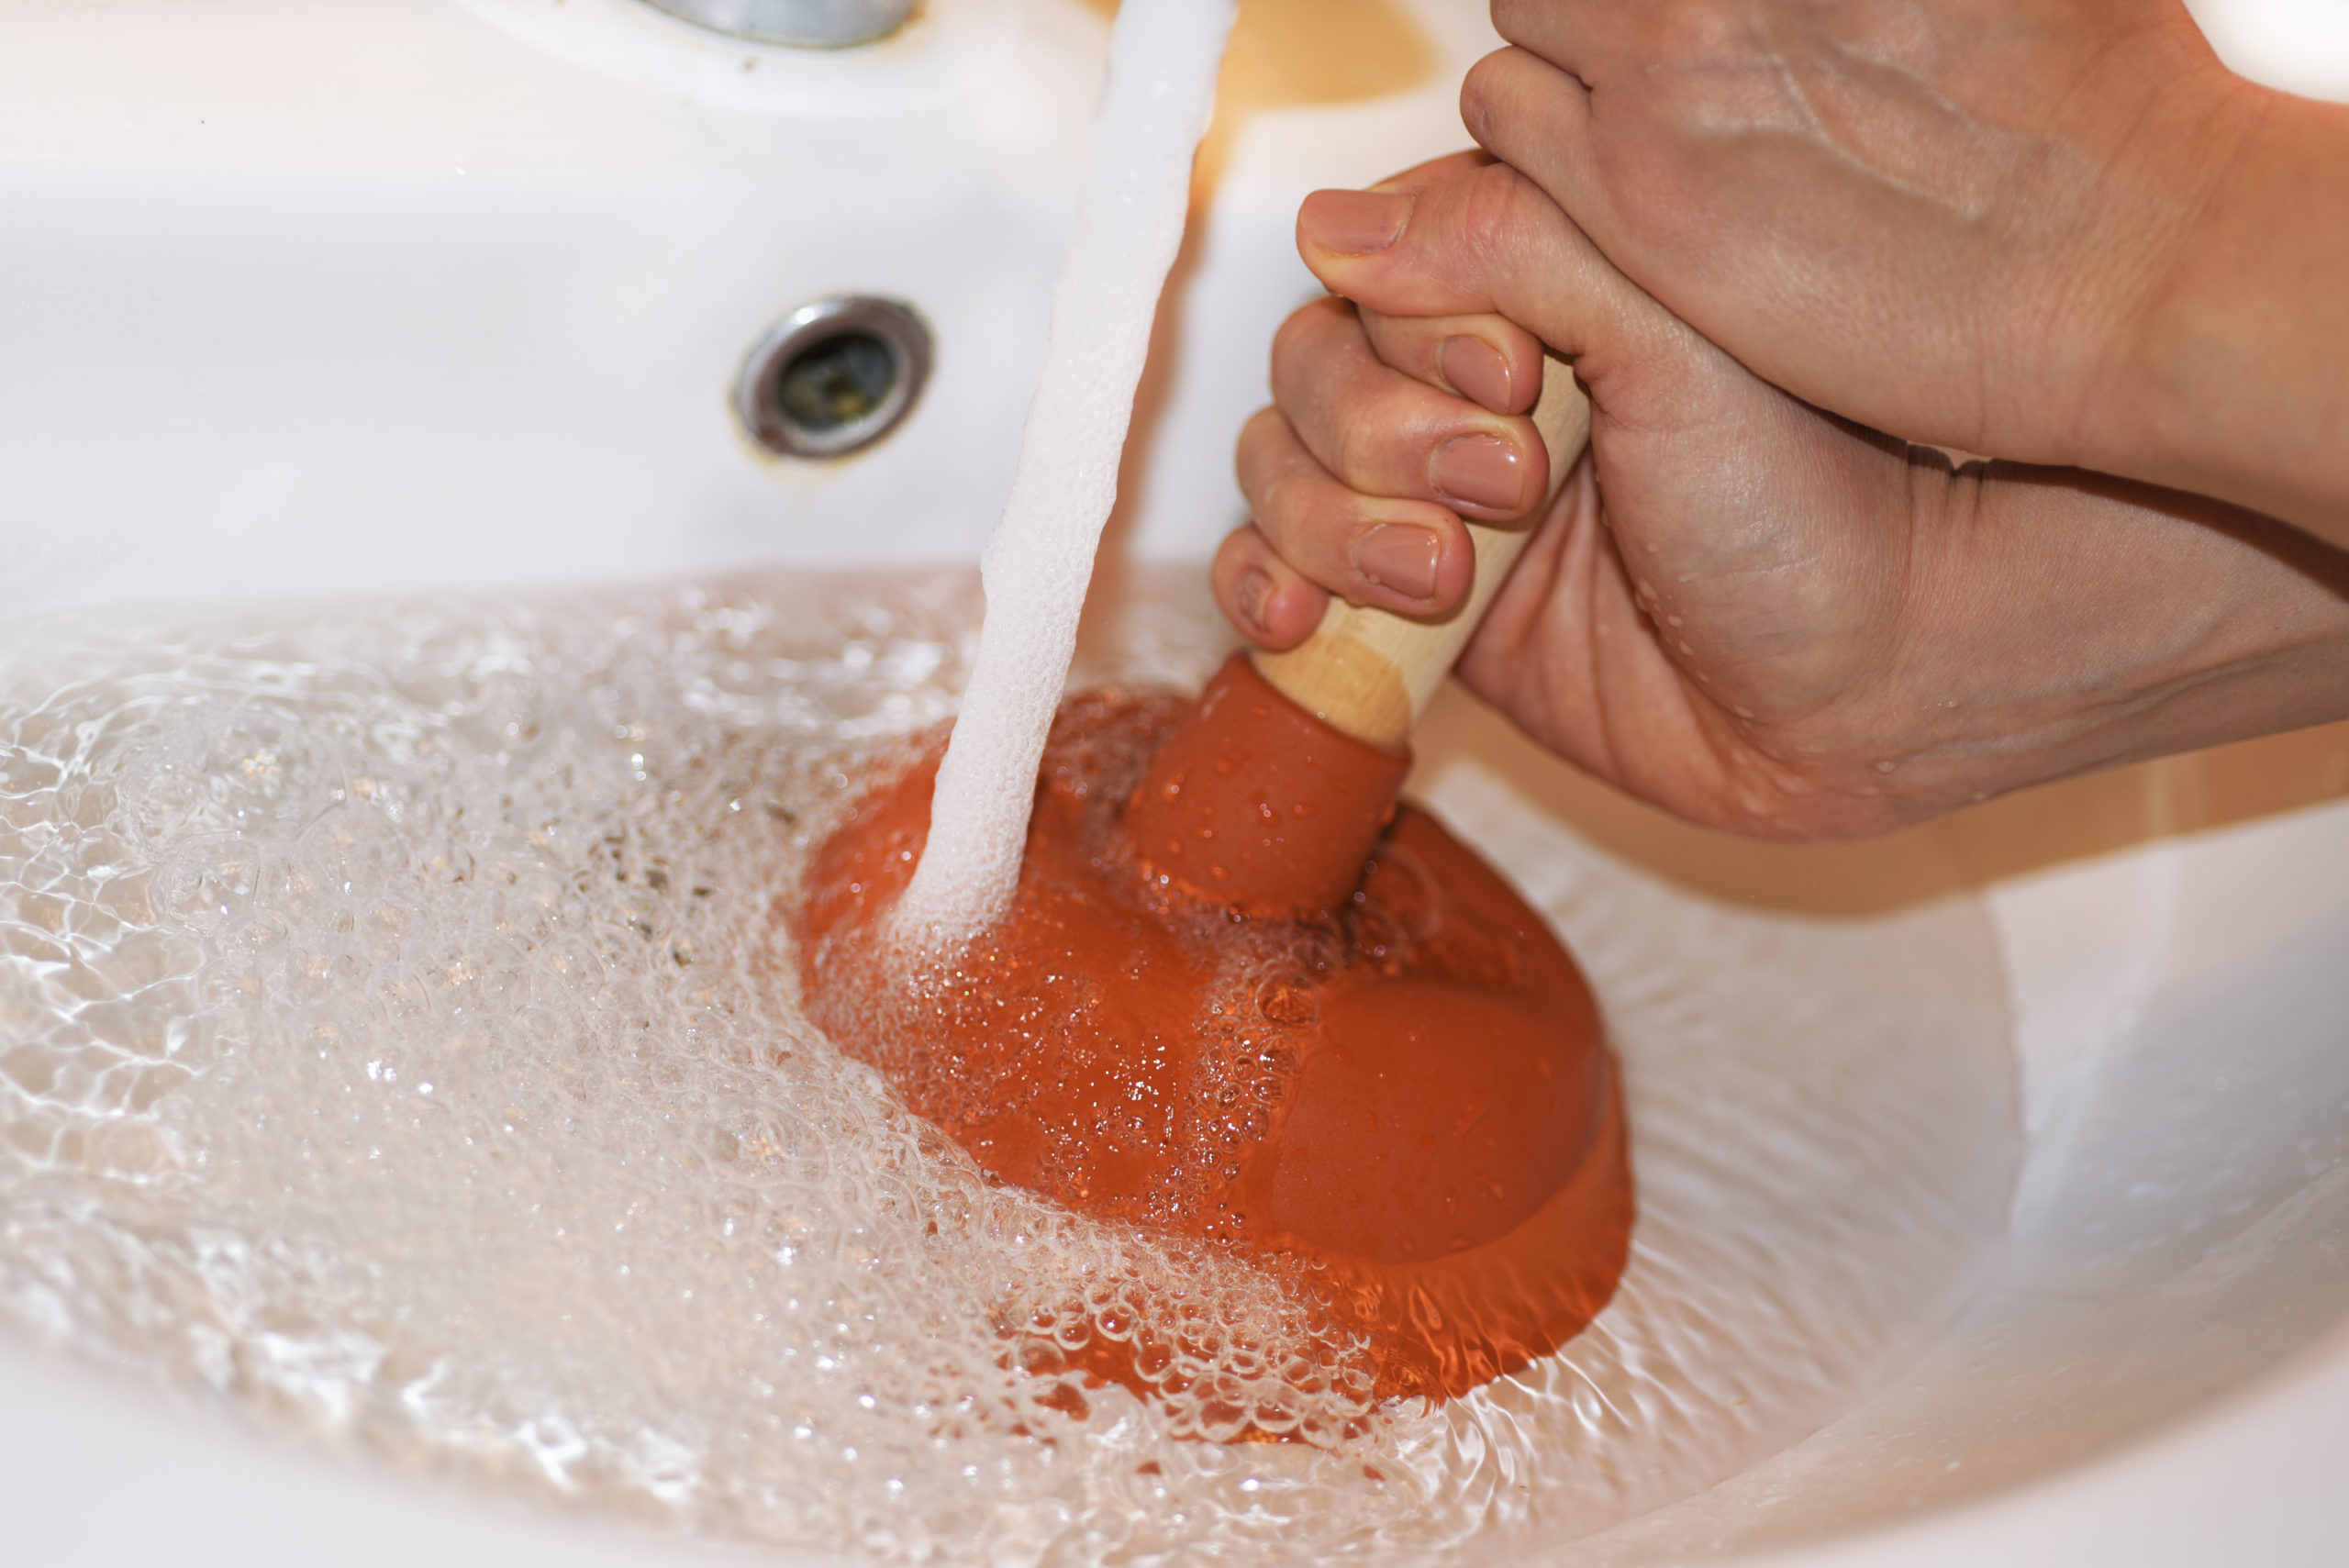 Using a plunger on a clogged sink | Clogged Drains